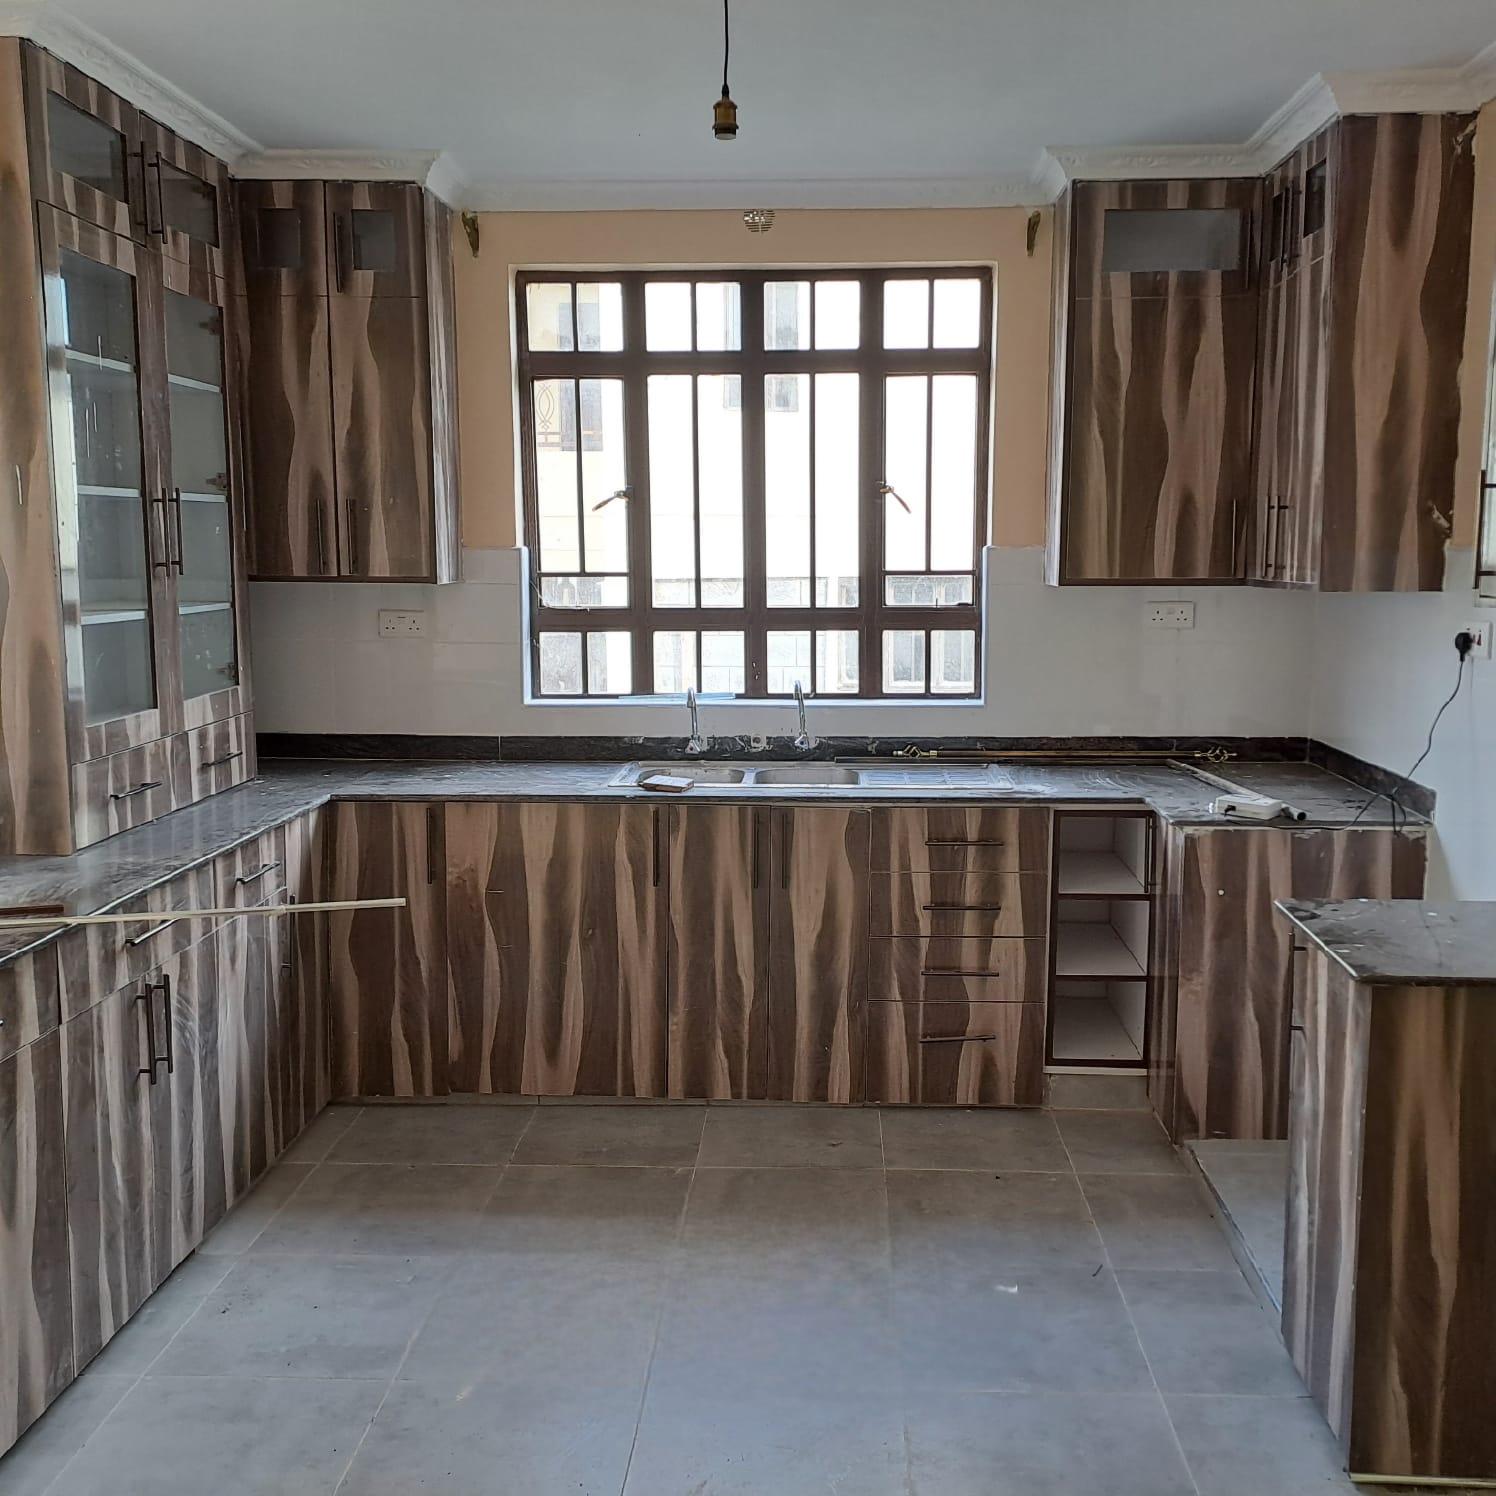 Spacious 4 bedrooms all ensuite with study room on an 1/8th acre with ready freehold title deeds. A 10 unit estate located in Rimpa, RONGAI Musilli Homes